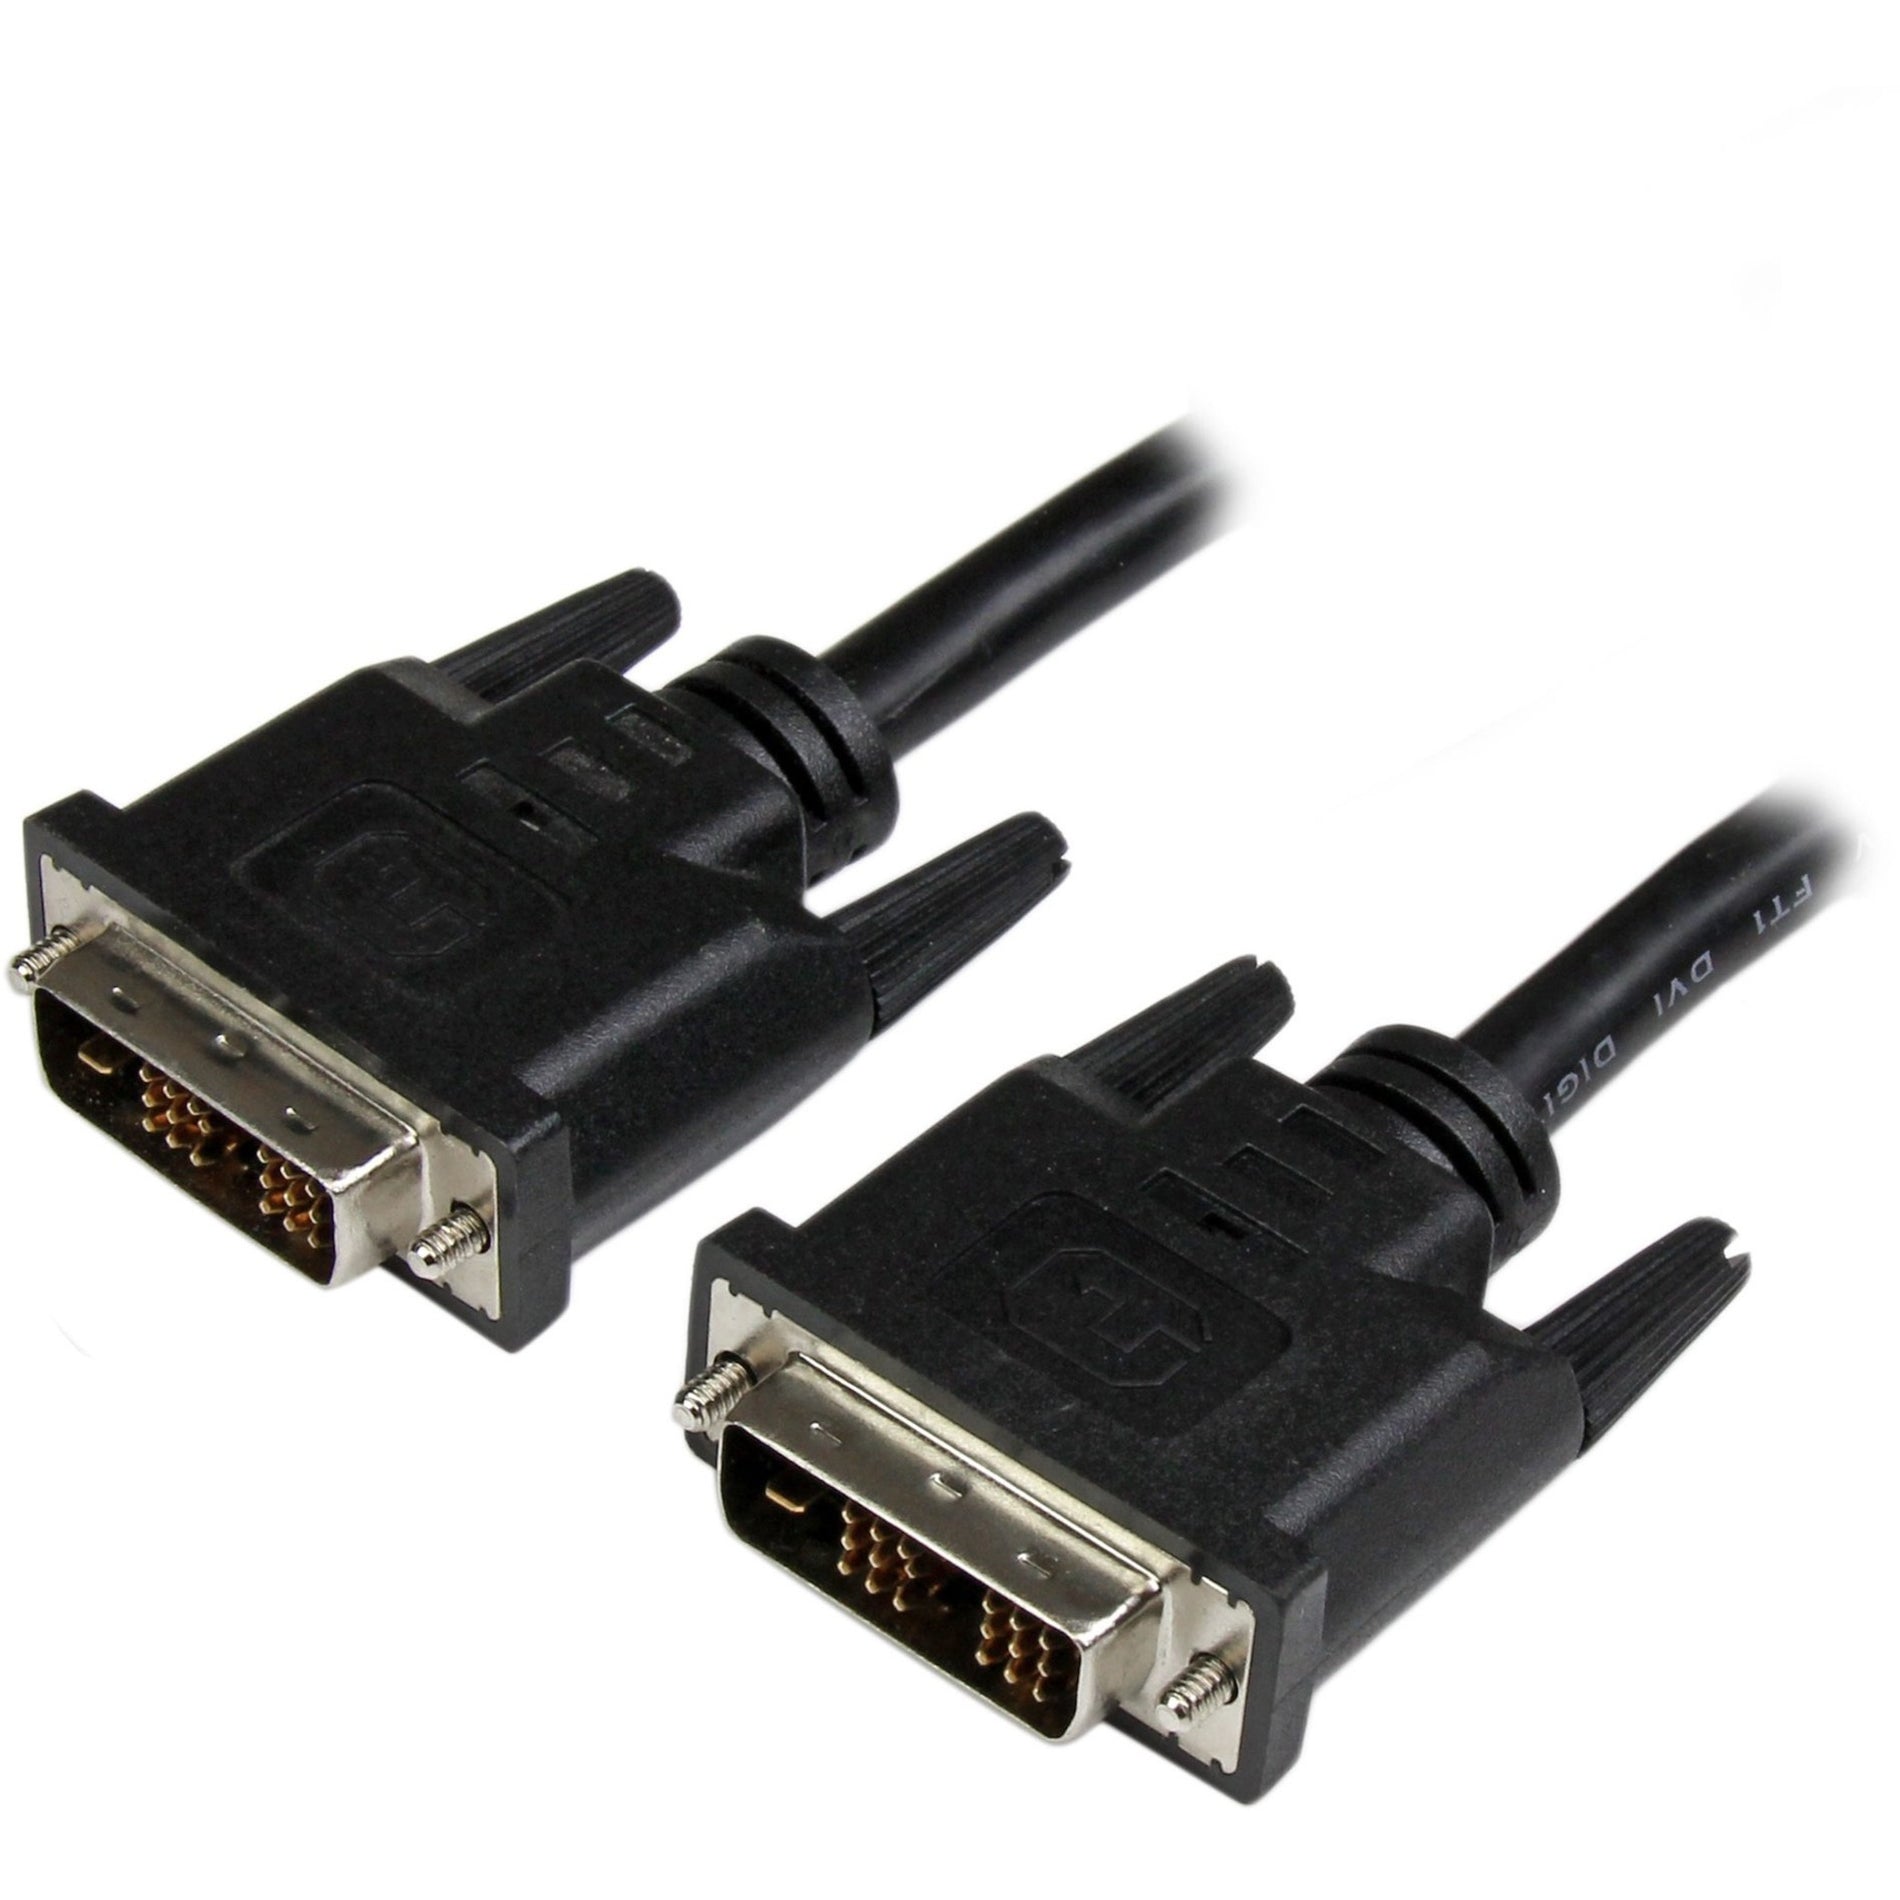 StarTech.com DVIMM3 3 ft DVI-D Single Link Cable - M/M, Copper Conductor, 5 Gbit/s Data Transfer Rate, 1920 x 1200 Supported Resolution